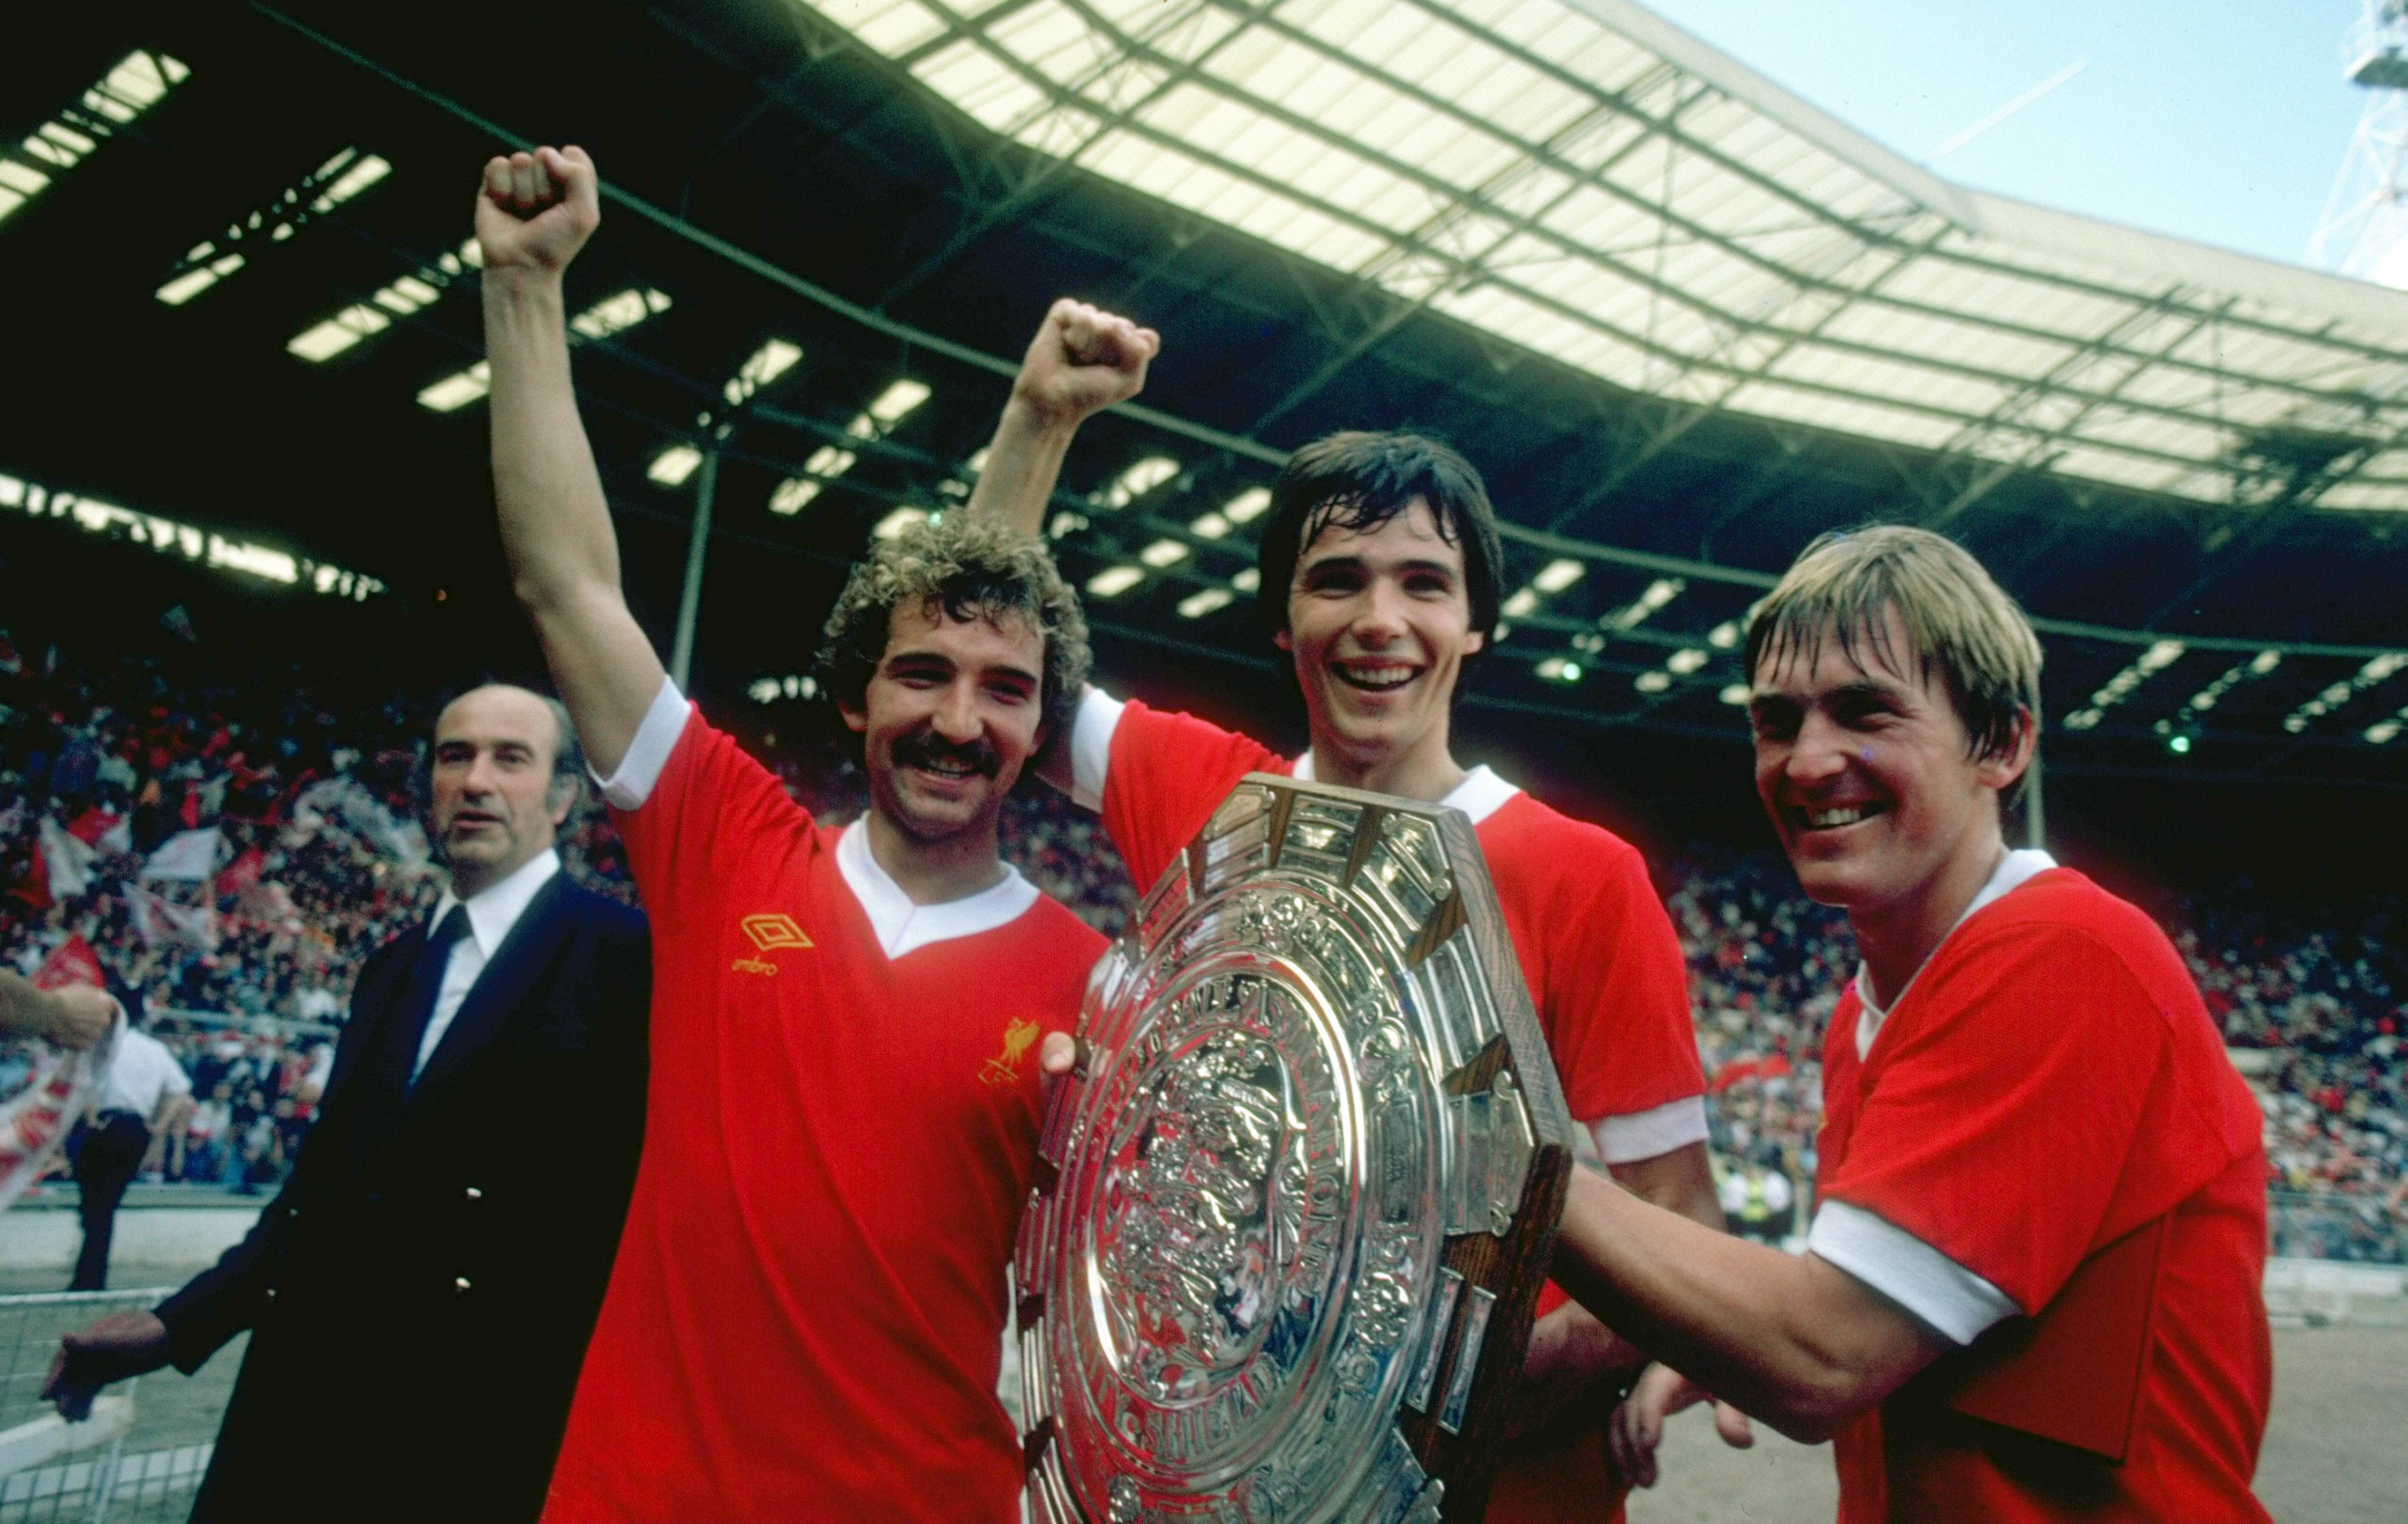 1979:  (Left to right) Graeme Souness, Alan Hansen and Kenny Dalglish of Liverpool hold the trophy after the Charity Shield match against Arsenal at Wembley Stadium in London. Liverpool won the match 3-1. \ Mandatory Credit: Allsport UK /Allsport